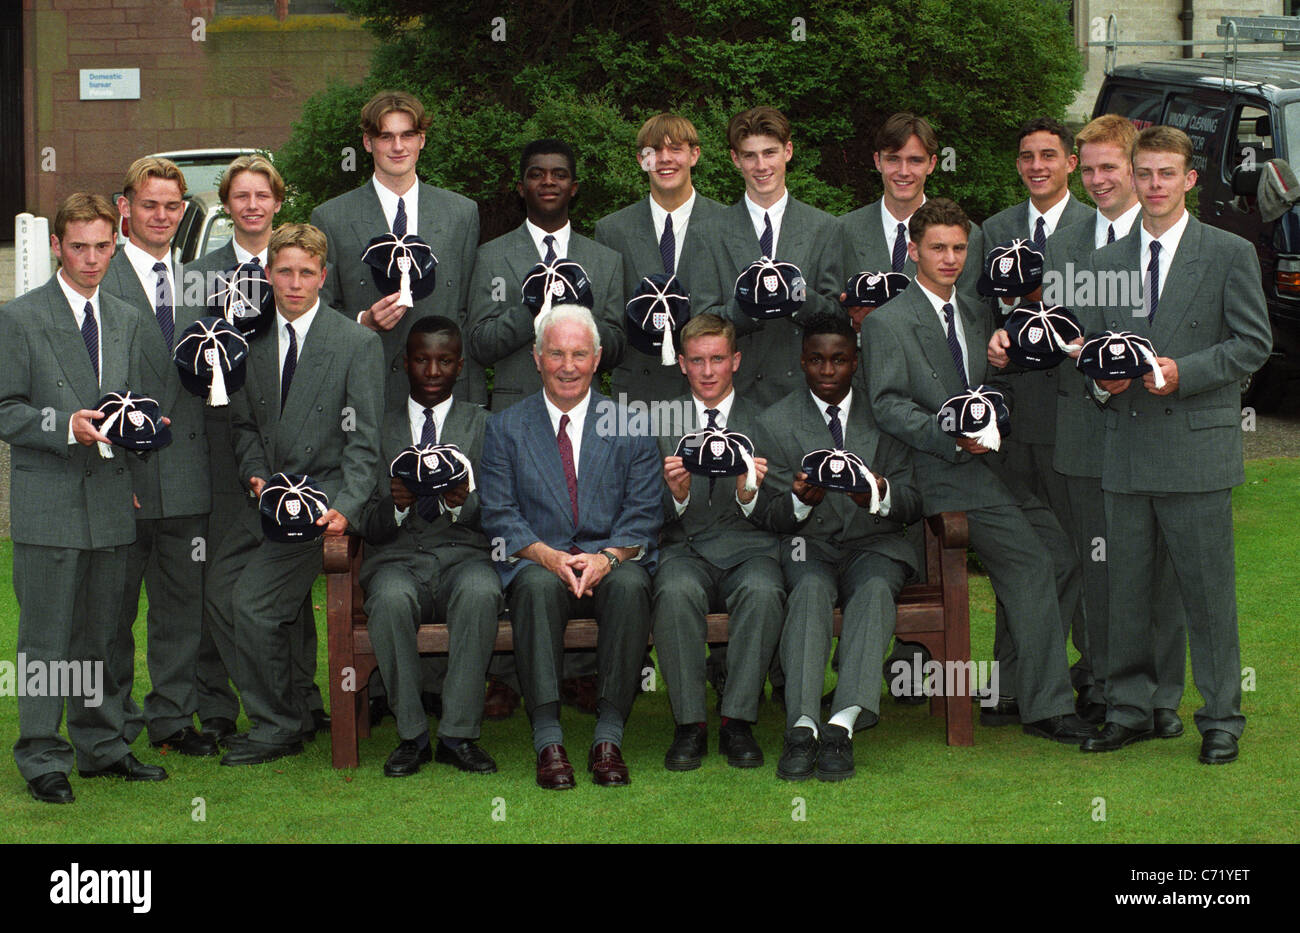 England coach Dave Sexton with the England Football Association school of excellence graduates. The Class of '93 at the FA School of Excellence at Lilleshall Hall, which honed the talents of some of England's most promising young footballers. Here the graduates pose with Dave Sexton, the FA school's former technical director, in July 1993. The graduates that year were David Beresford, Albert Clarke, Neil Cutler, Clinton Ellis, Jamie Howell, Richard Hurst, Andrew Lovelock, Jonathan O'Connor, Steven Pass, Gary Pearson, Mark Peters, Ian Smith, Simon Spencer, Matthew Thorp, Dene White, Simon Wood. Stock Photo